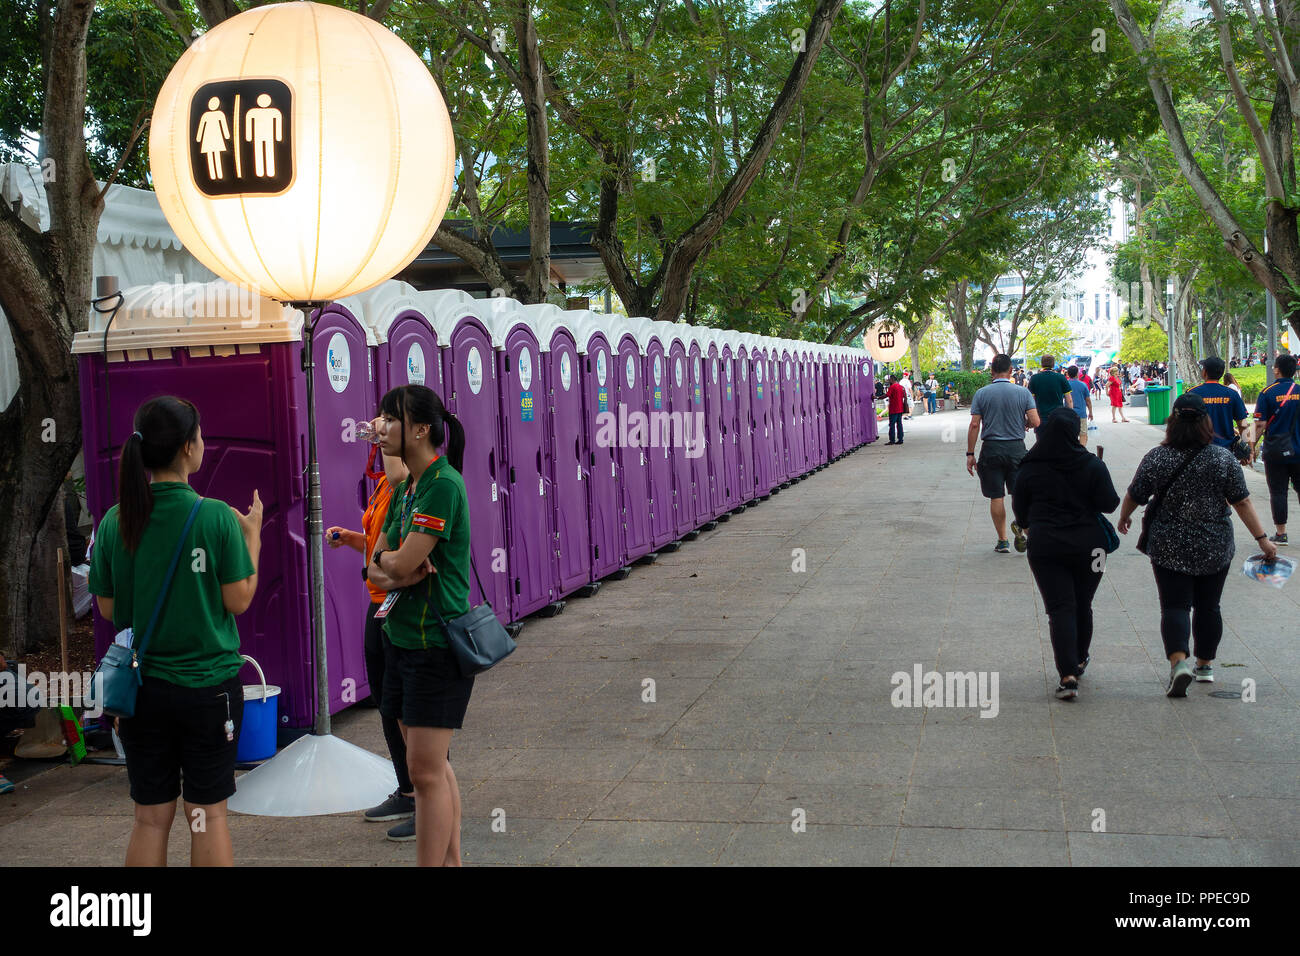 A Long Row of Purple Ladies and Gents Toilets for Public Use at the Formula One Singapore Grand Prix Motor Racing Event in Singapore Asia Stock Photo